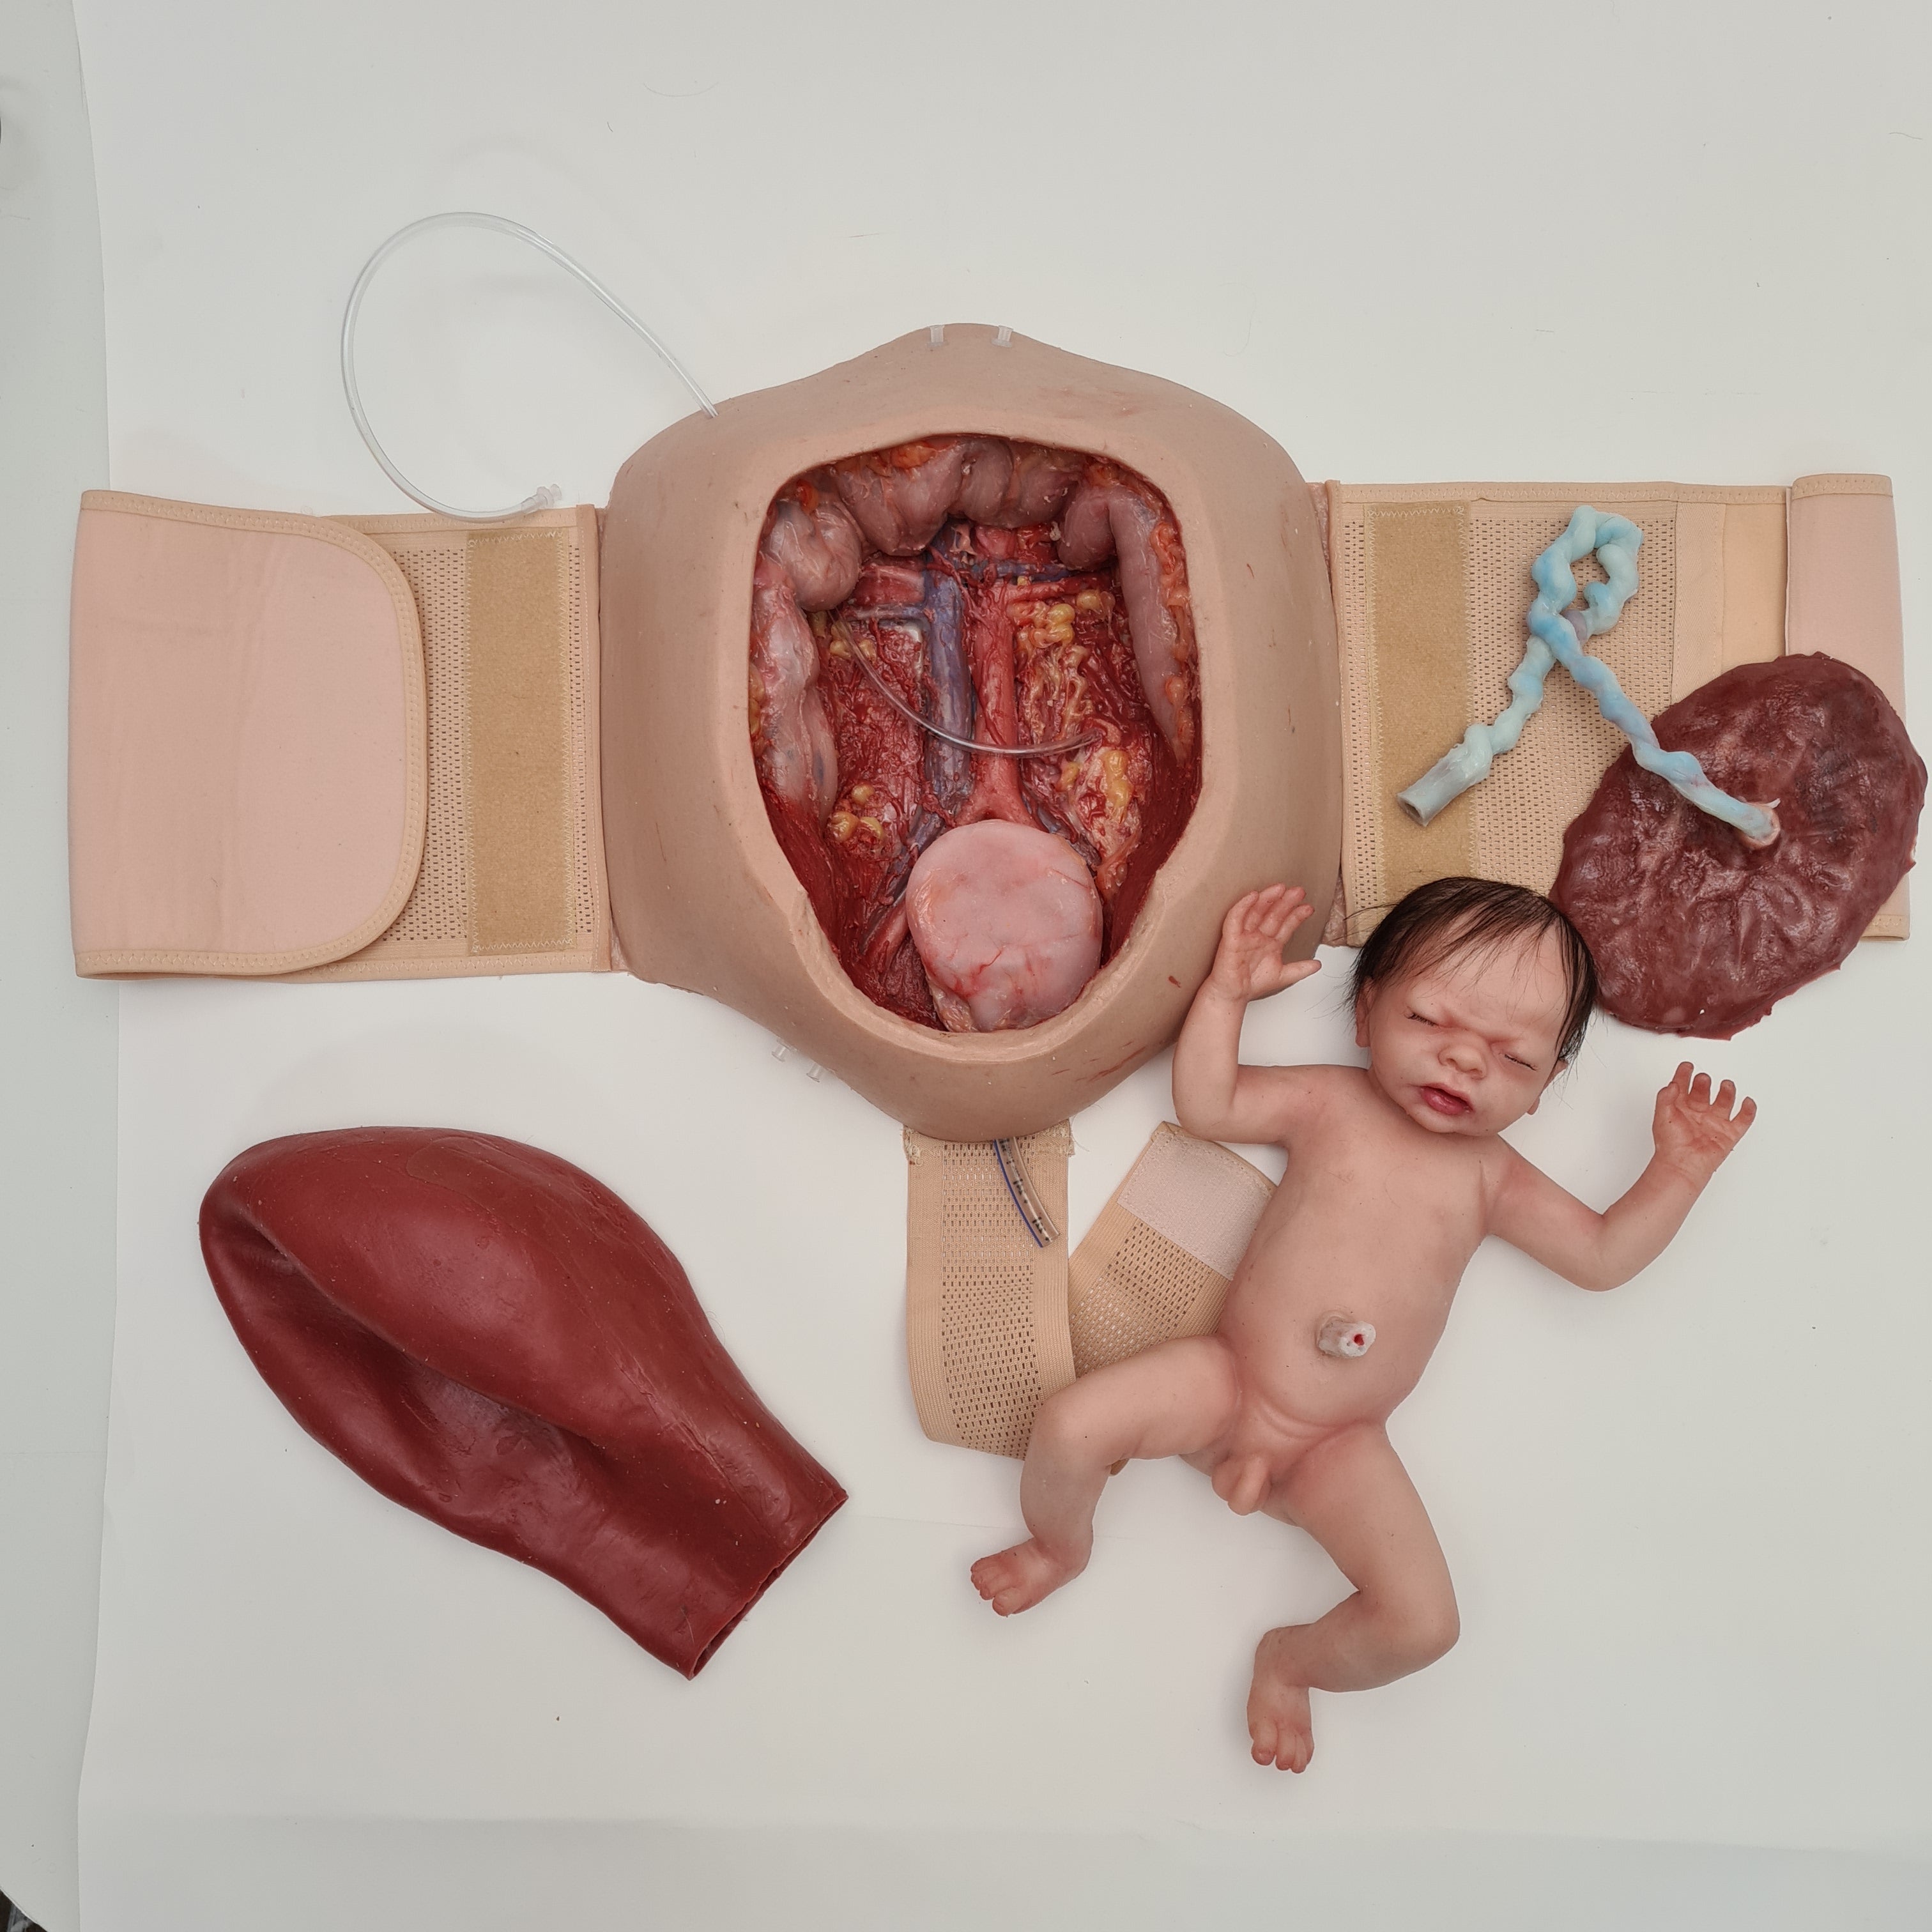 MO750 Wearable C-section model - MedicFX